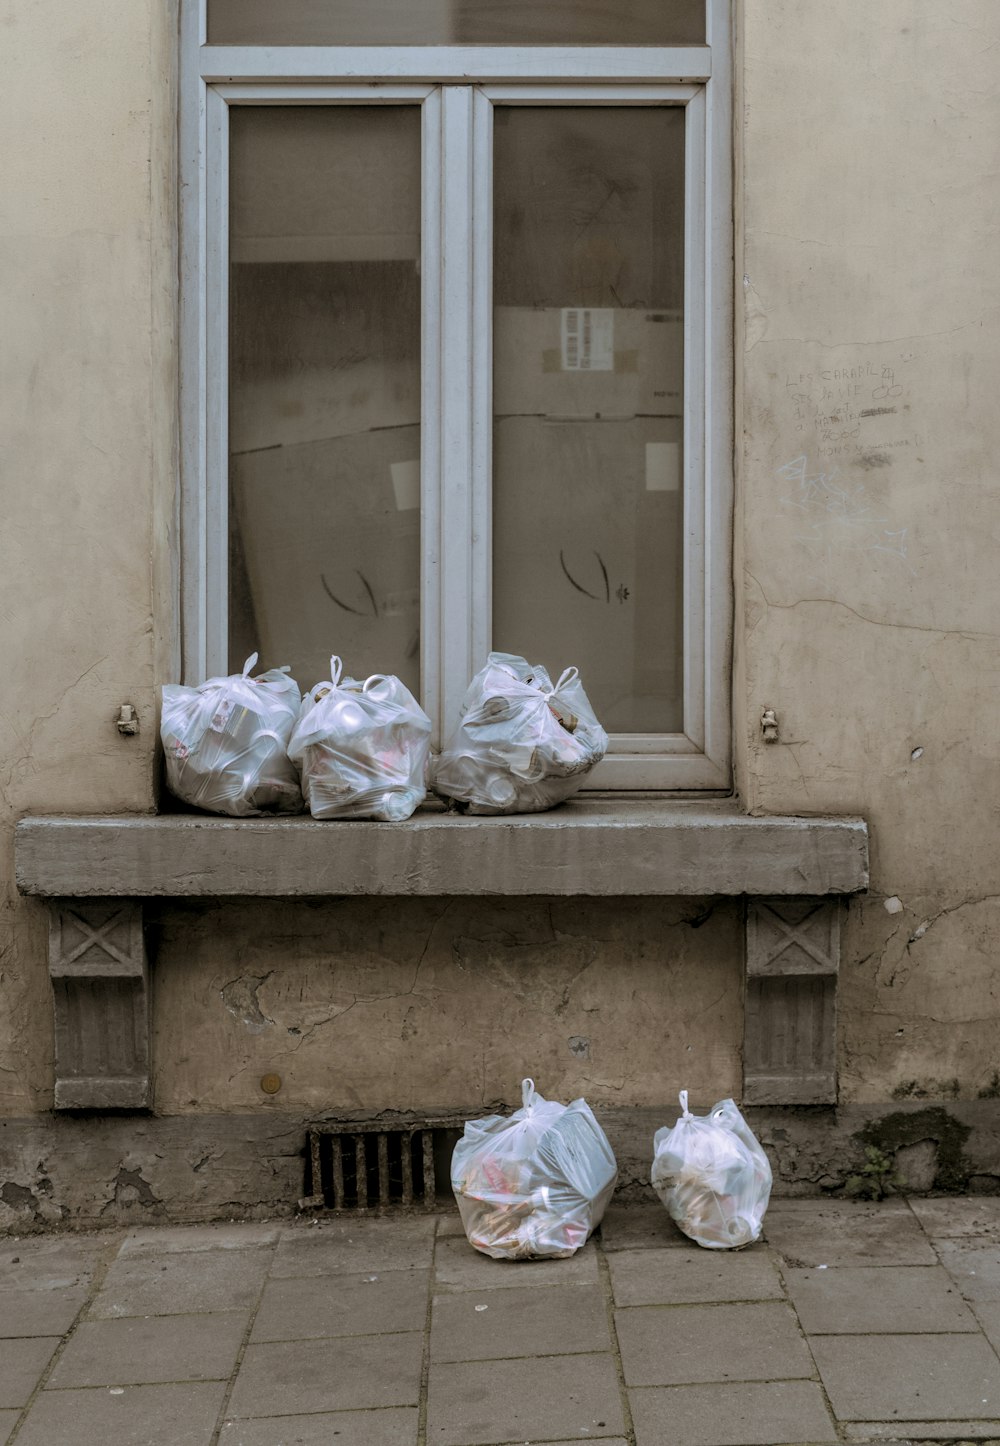 bags of garbage sitting on a window sill